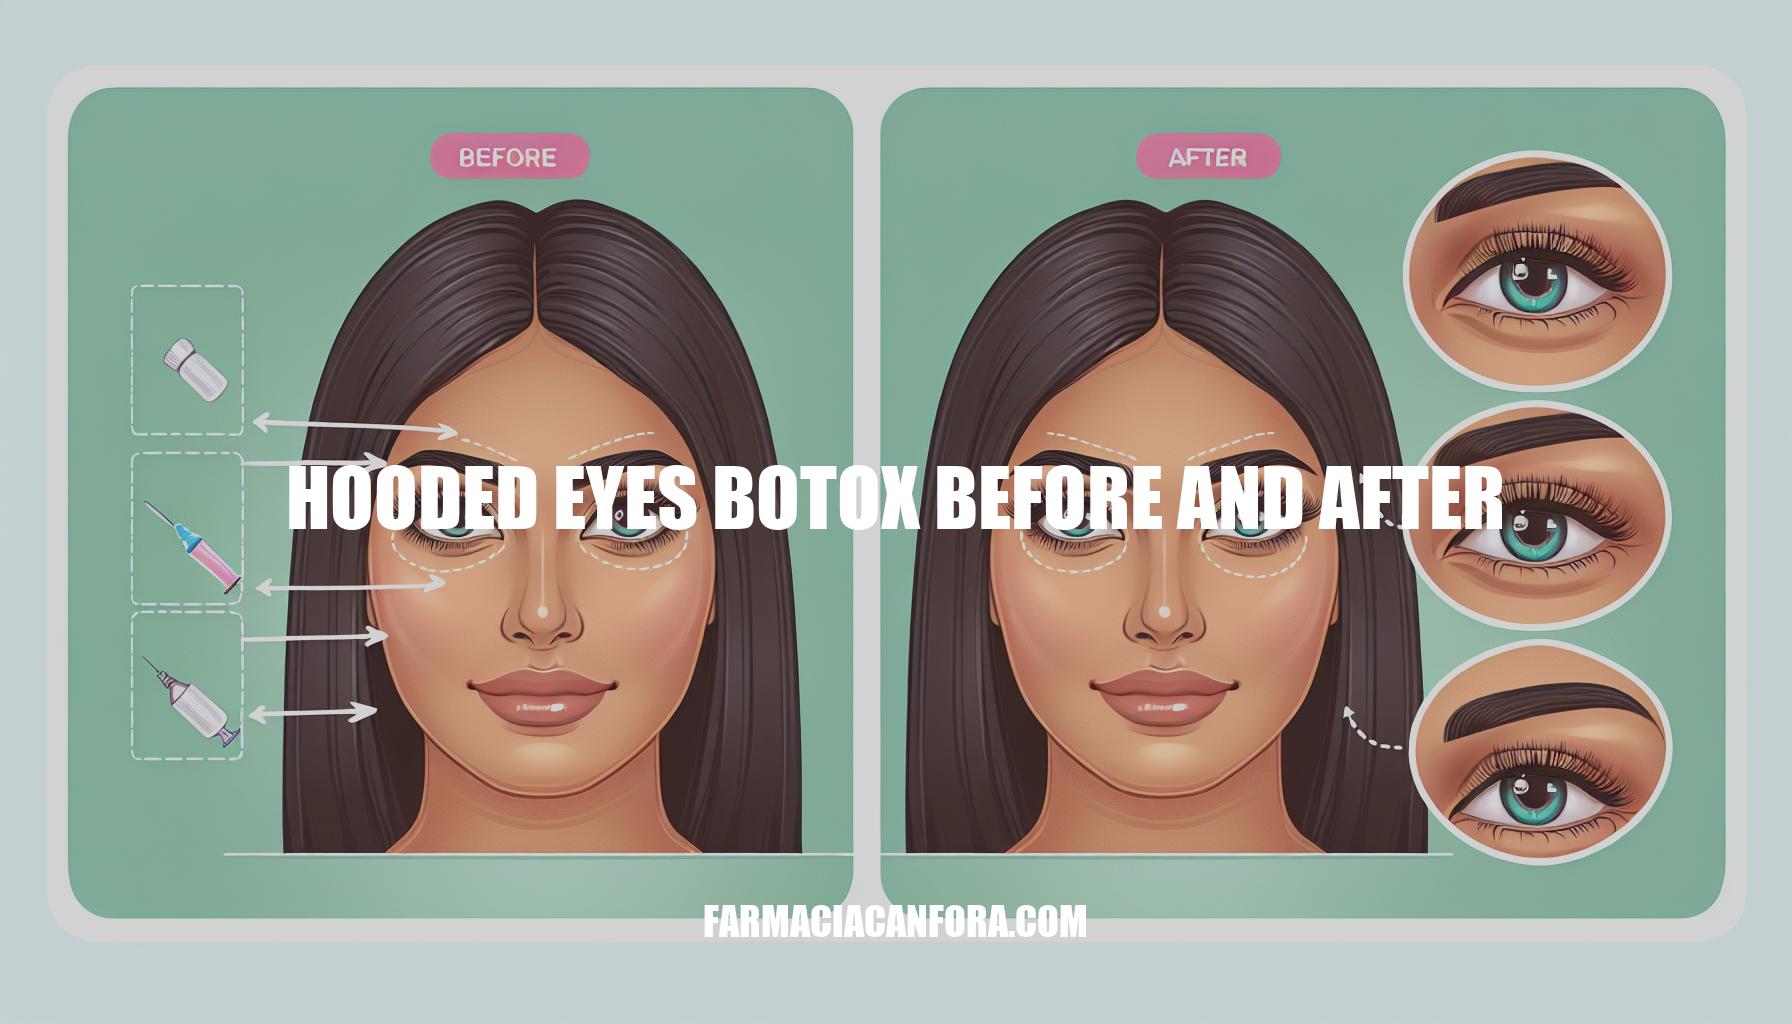 Hooded Eyes Botox Before and After Guide